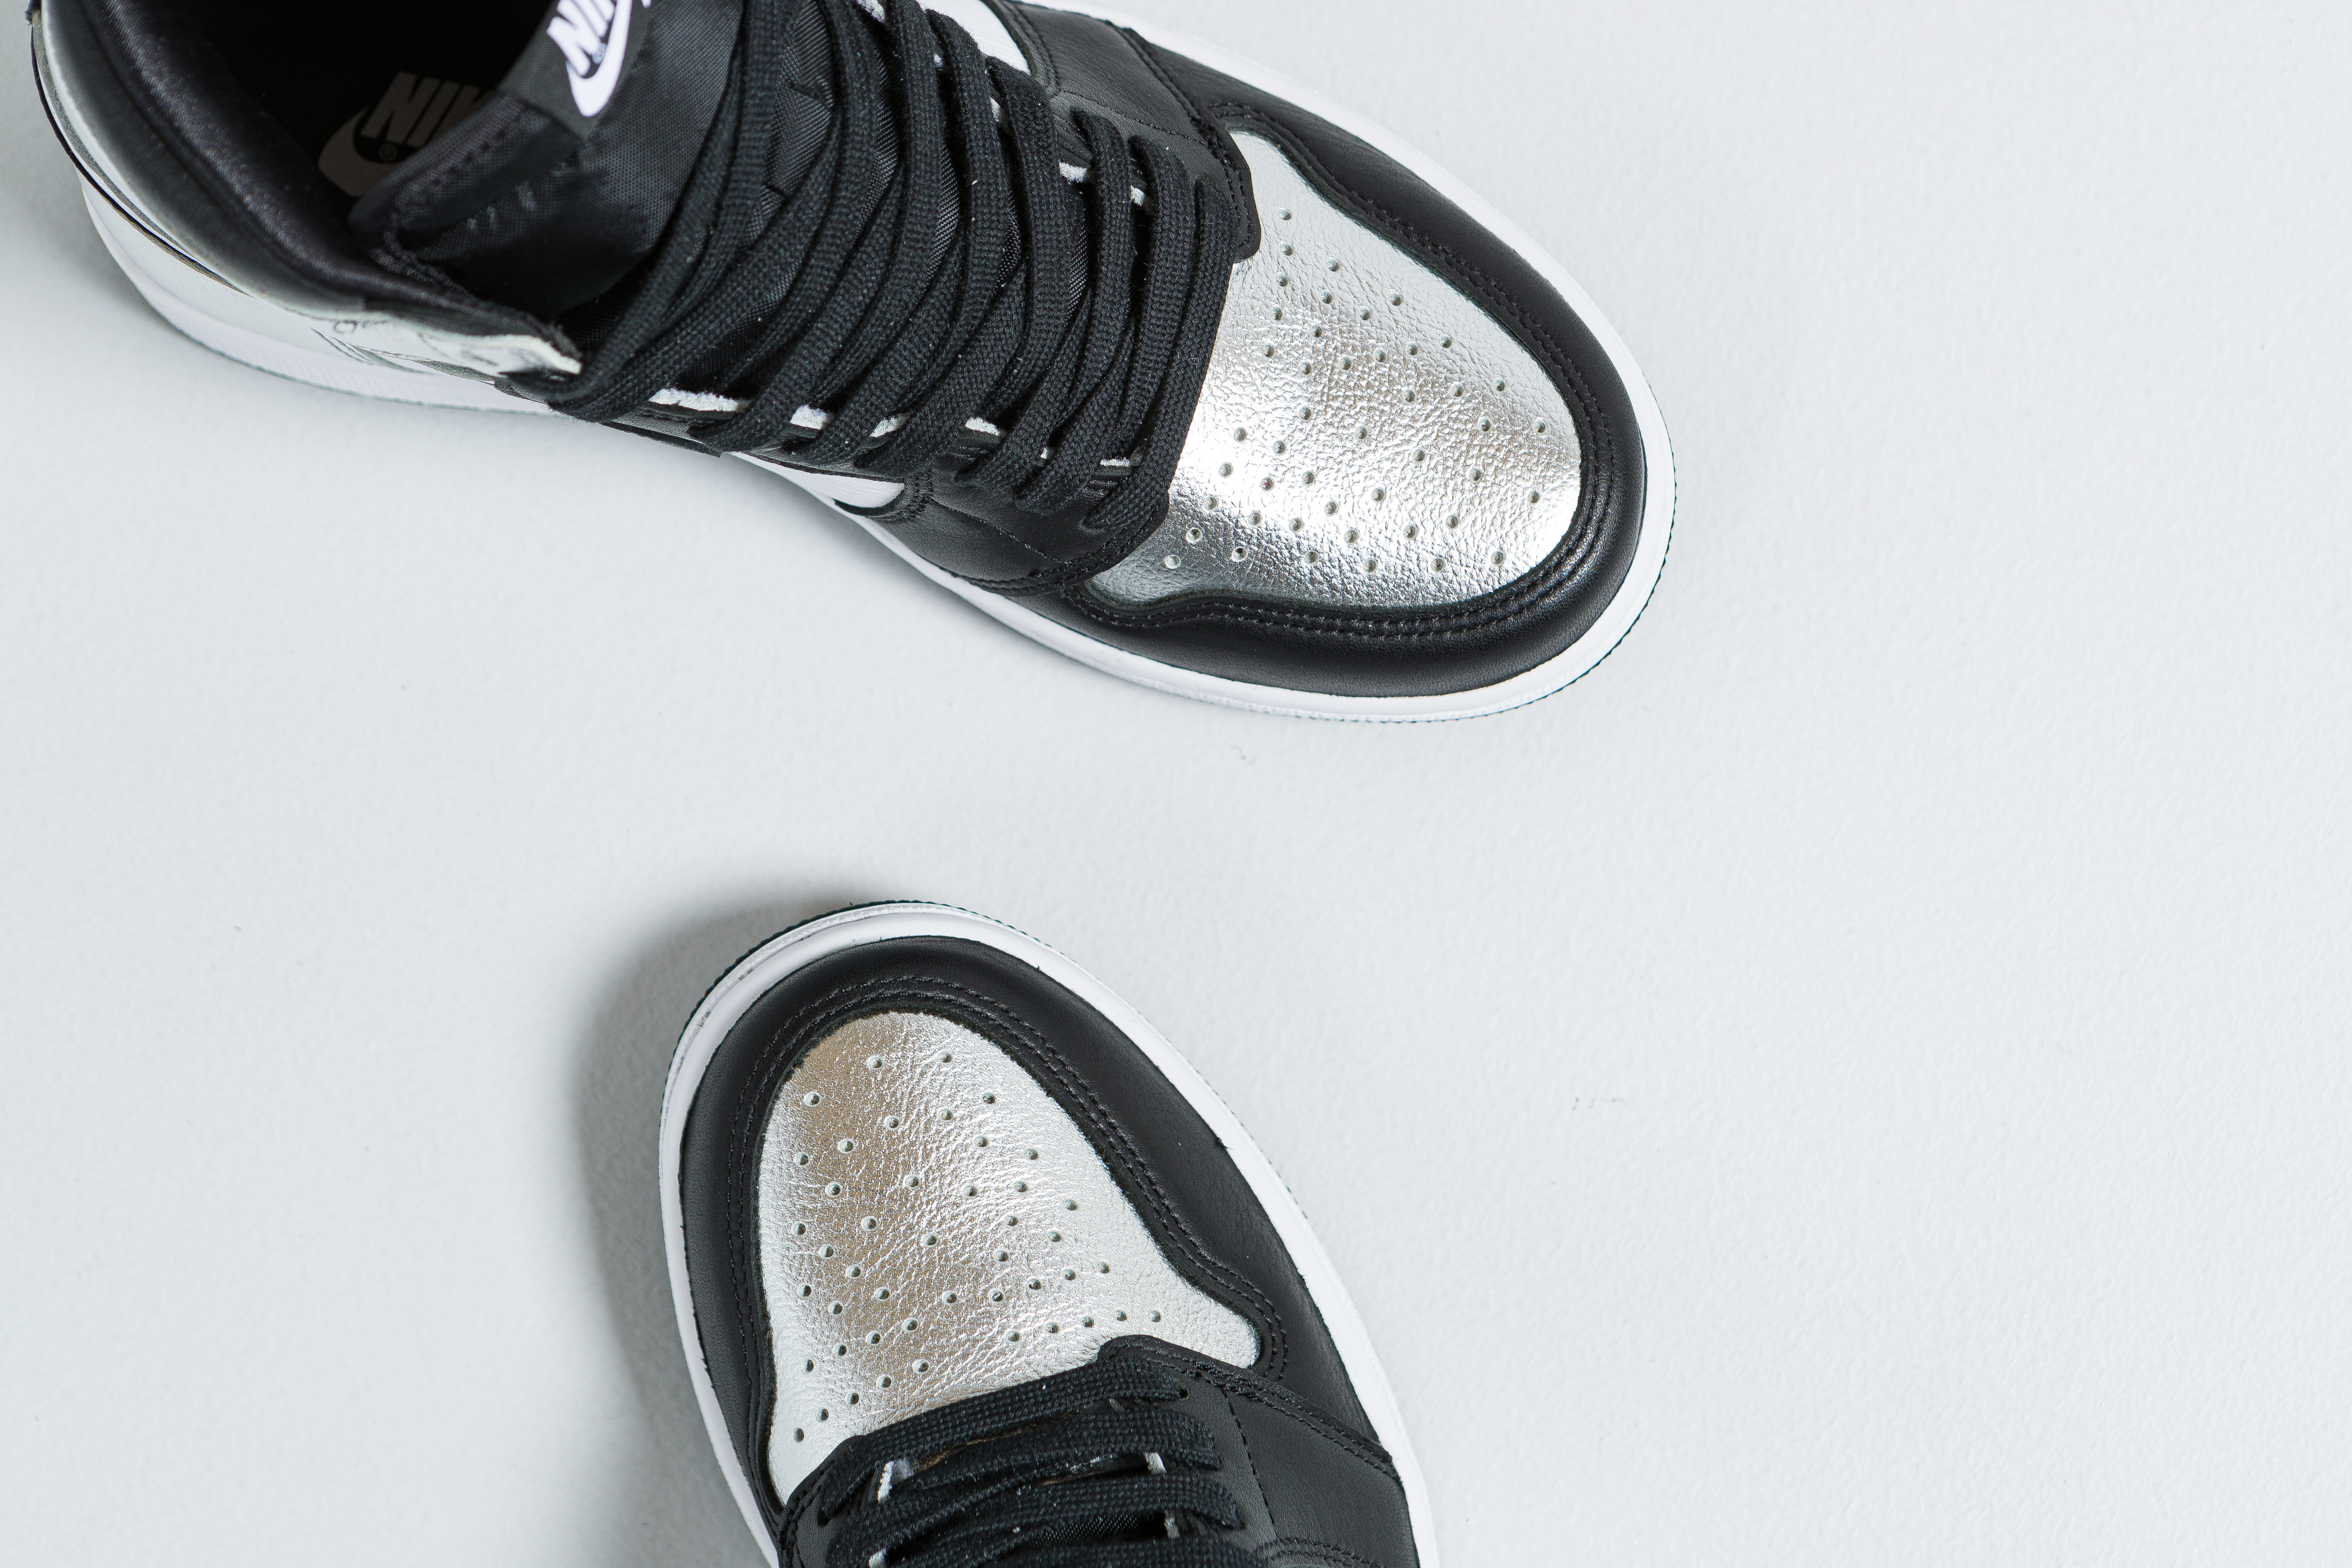 Up There Launches - Nike Air Jordan 1 Women's 'Silver Toe'